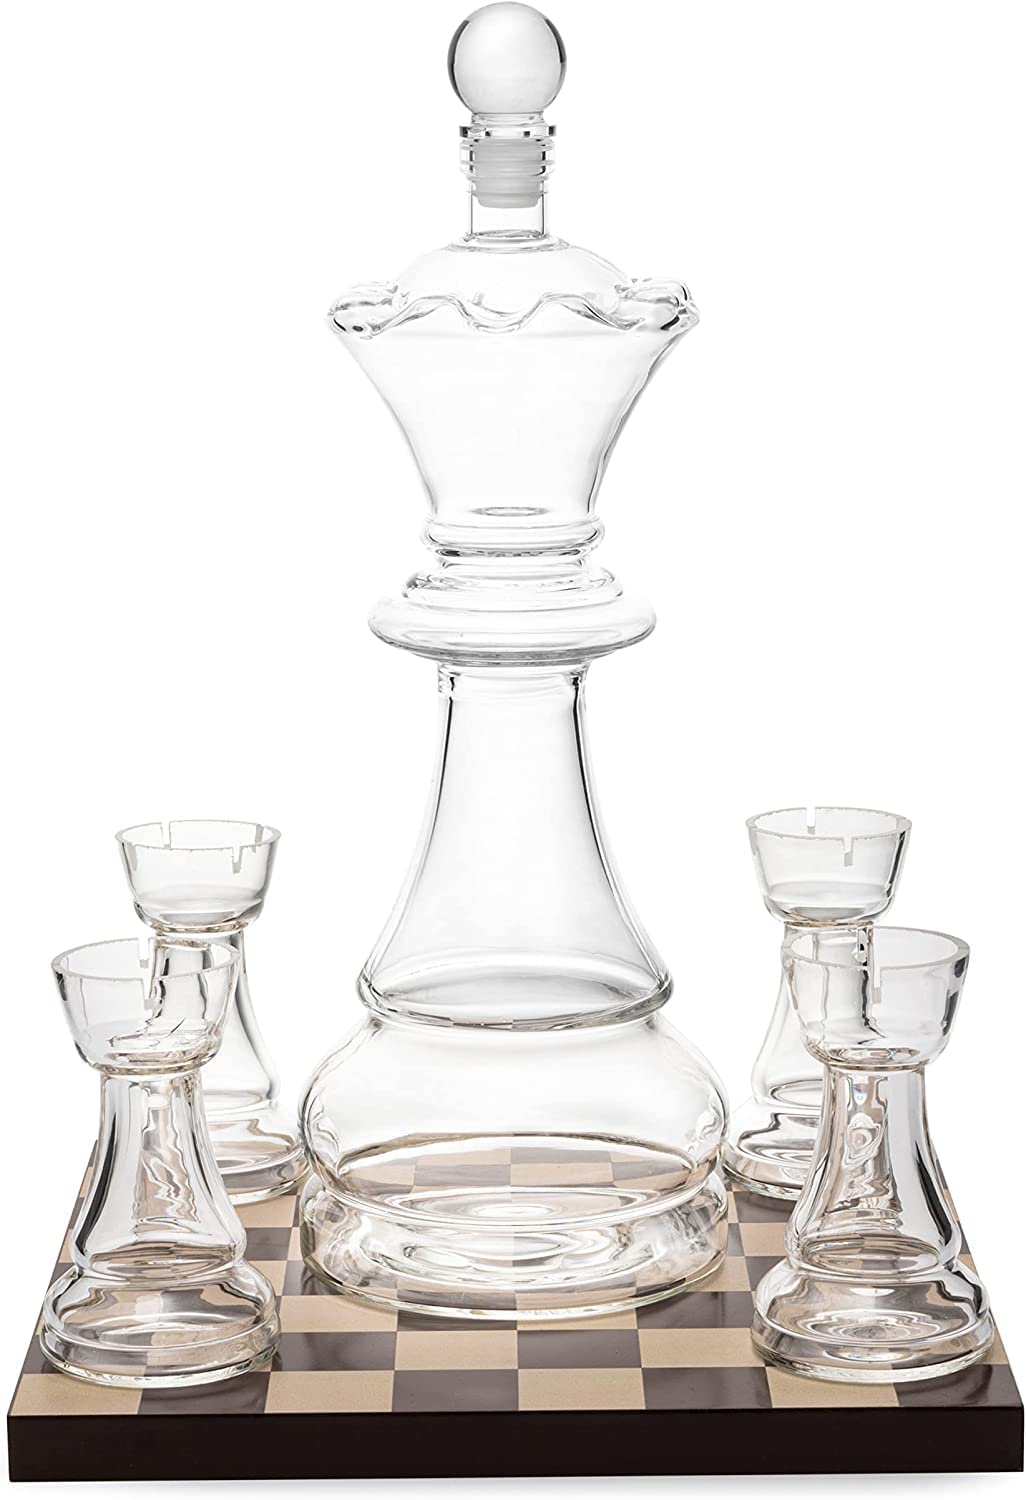 New Chess Decanter Set by Liquor Lux - Queen Chess Decanter 750ml 12" H With 4 Rook Shot Glasses 4oz - Queen's Gambit, Chess Player Gifts, Whiskey, Wine Lovers Gifts for Dad…